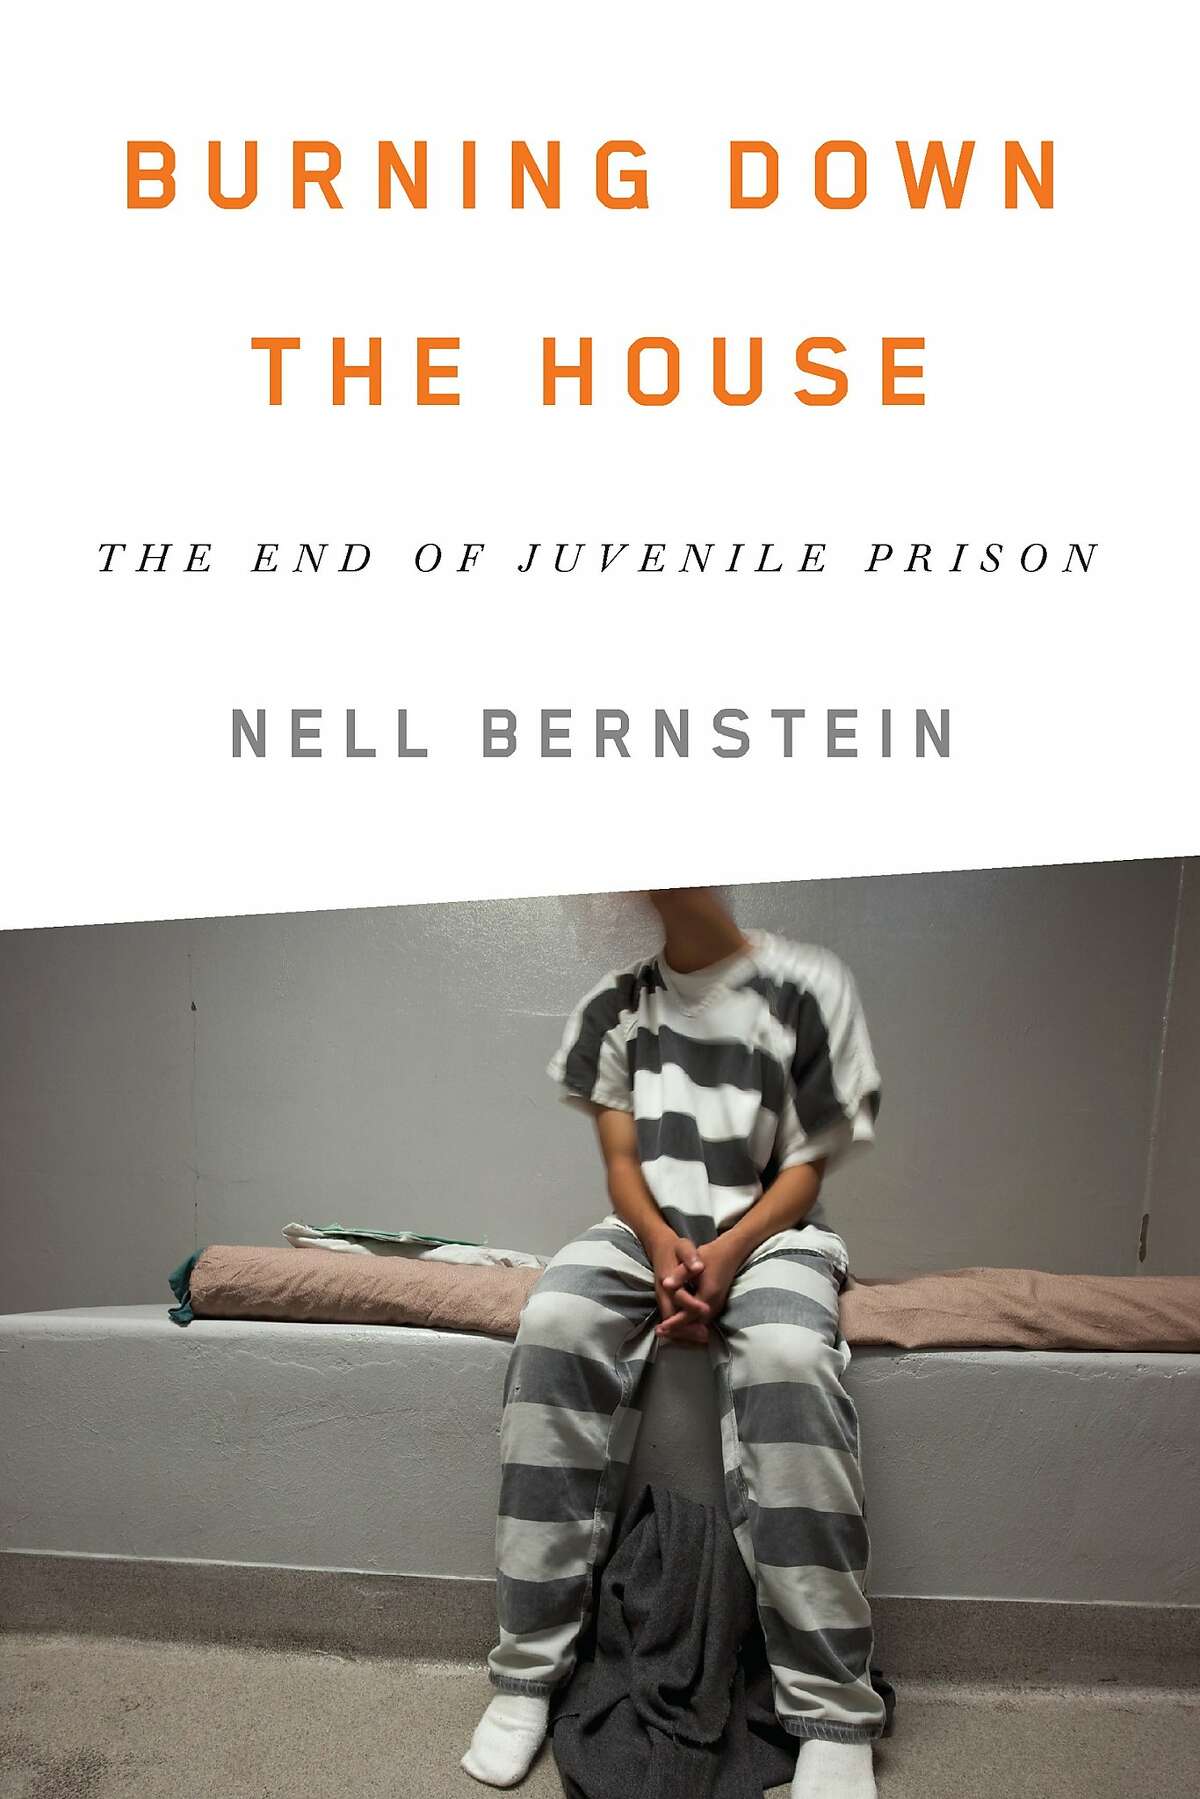 "Burning Down the House: The End of Juvenile Prison," by Nell Bernstein